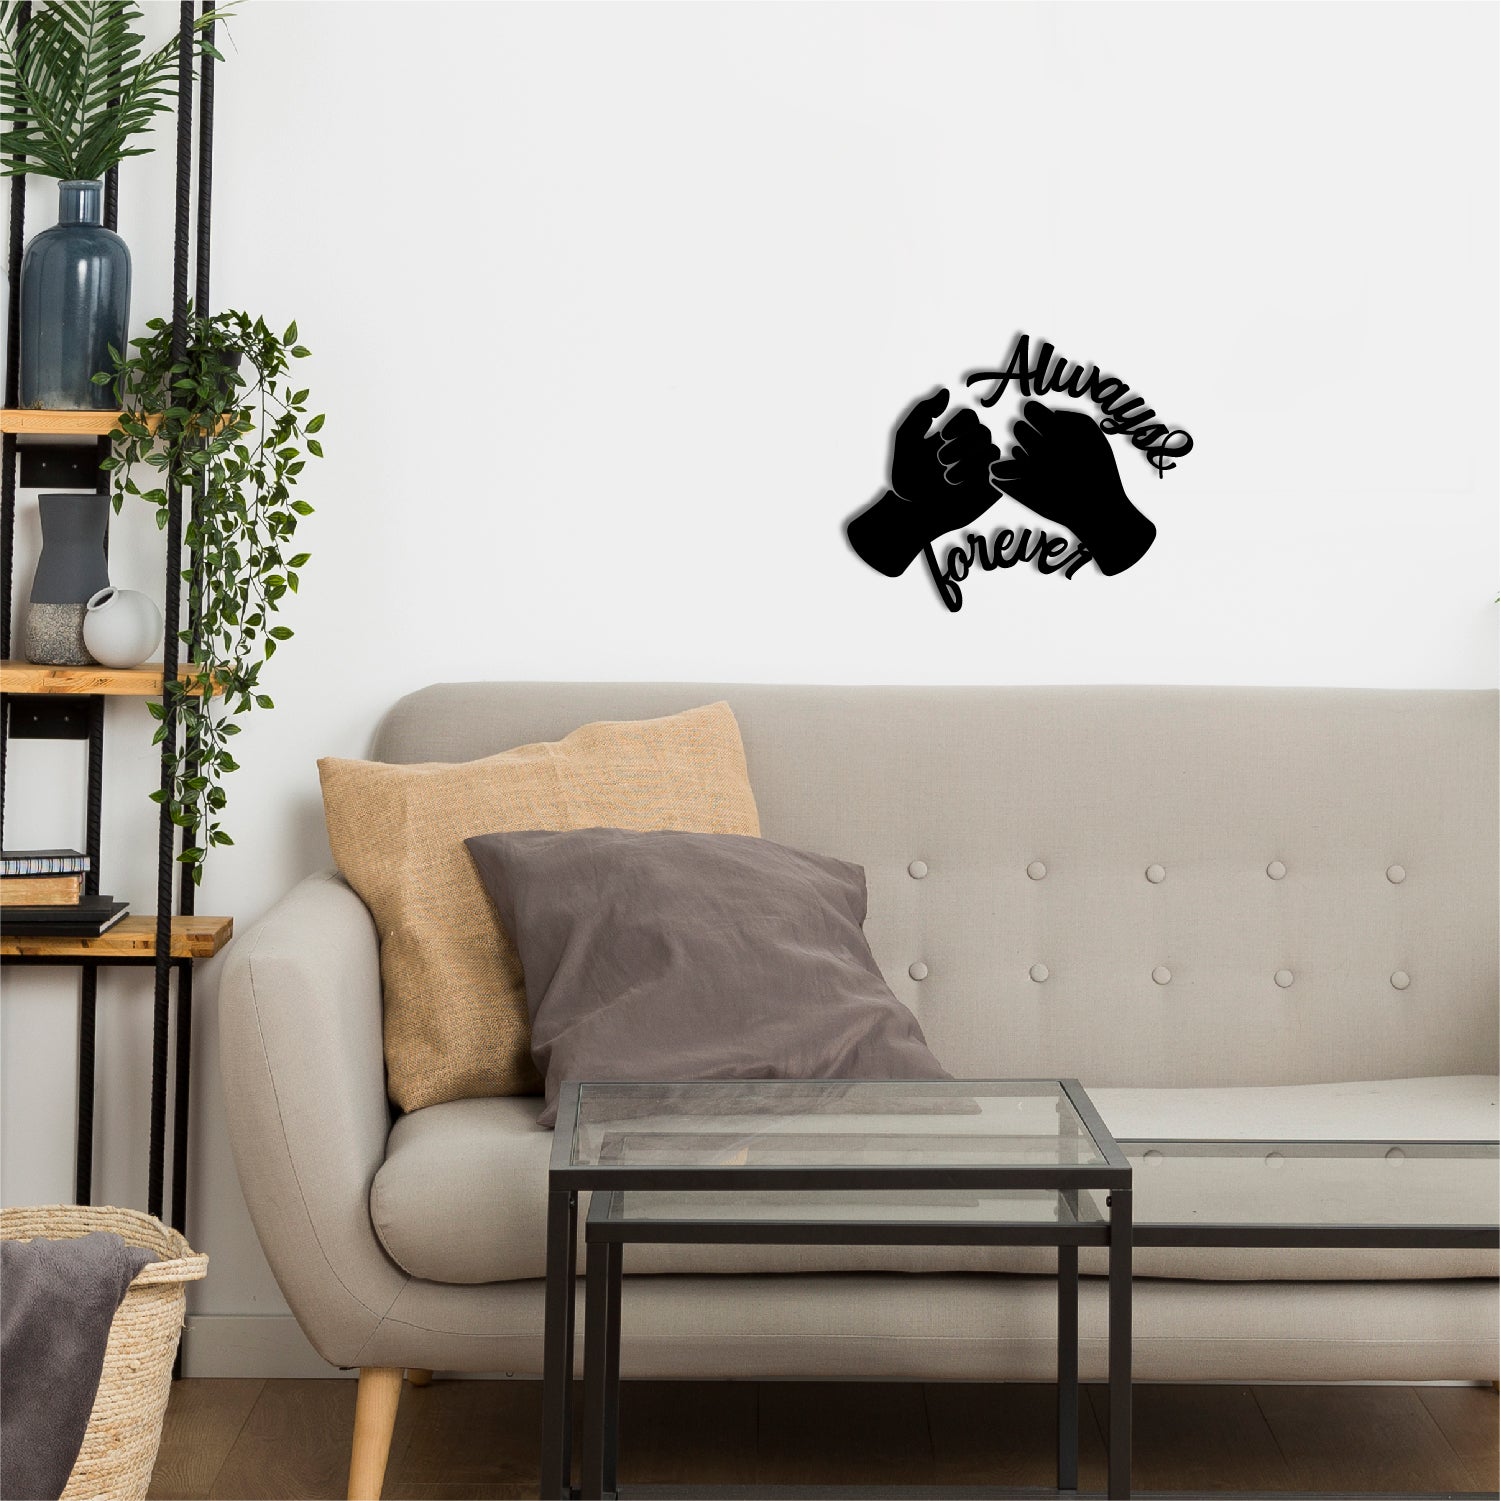 "Always & Forever" Love Theme Black Engineered Wood Wall Art Cutout, Ready to Hang Home Decor 1